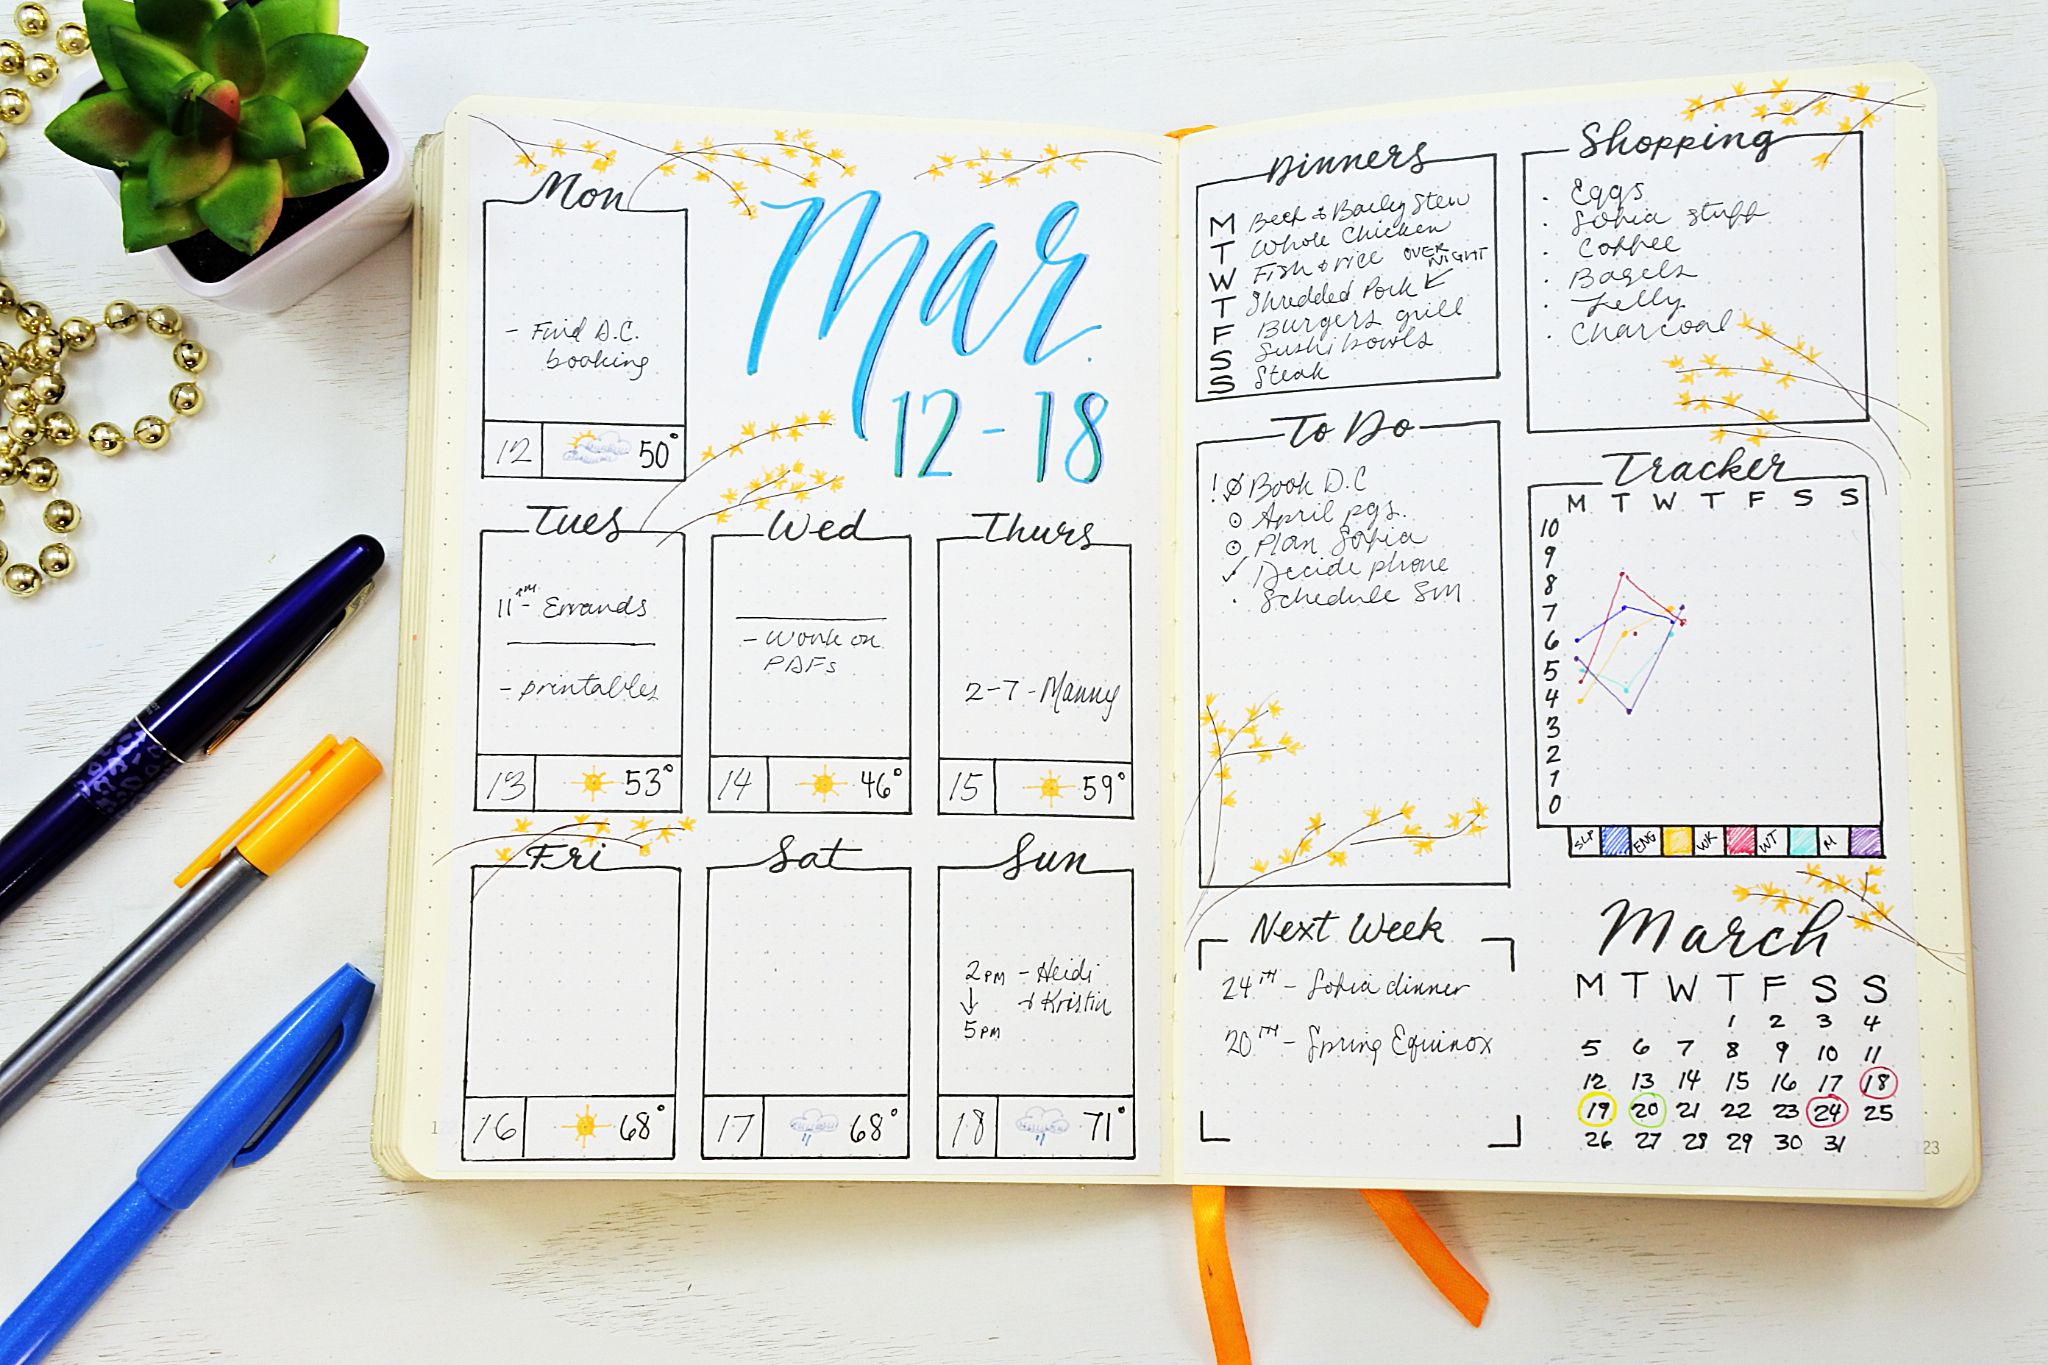 25+ Smart Bullet Journal Ideas to Try Now » Jessica Paster